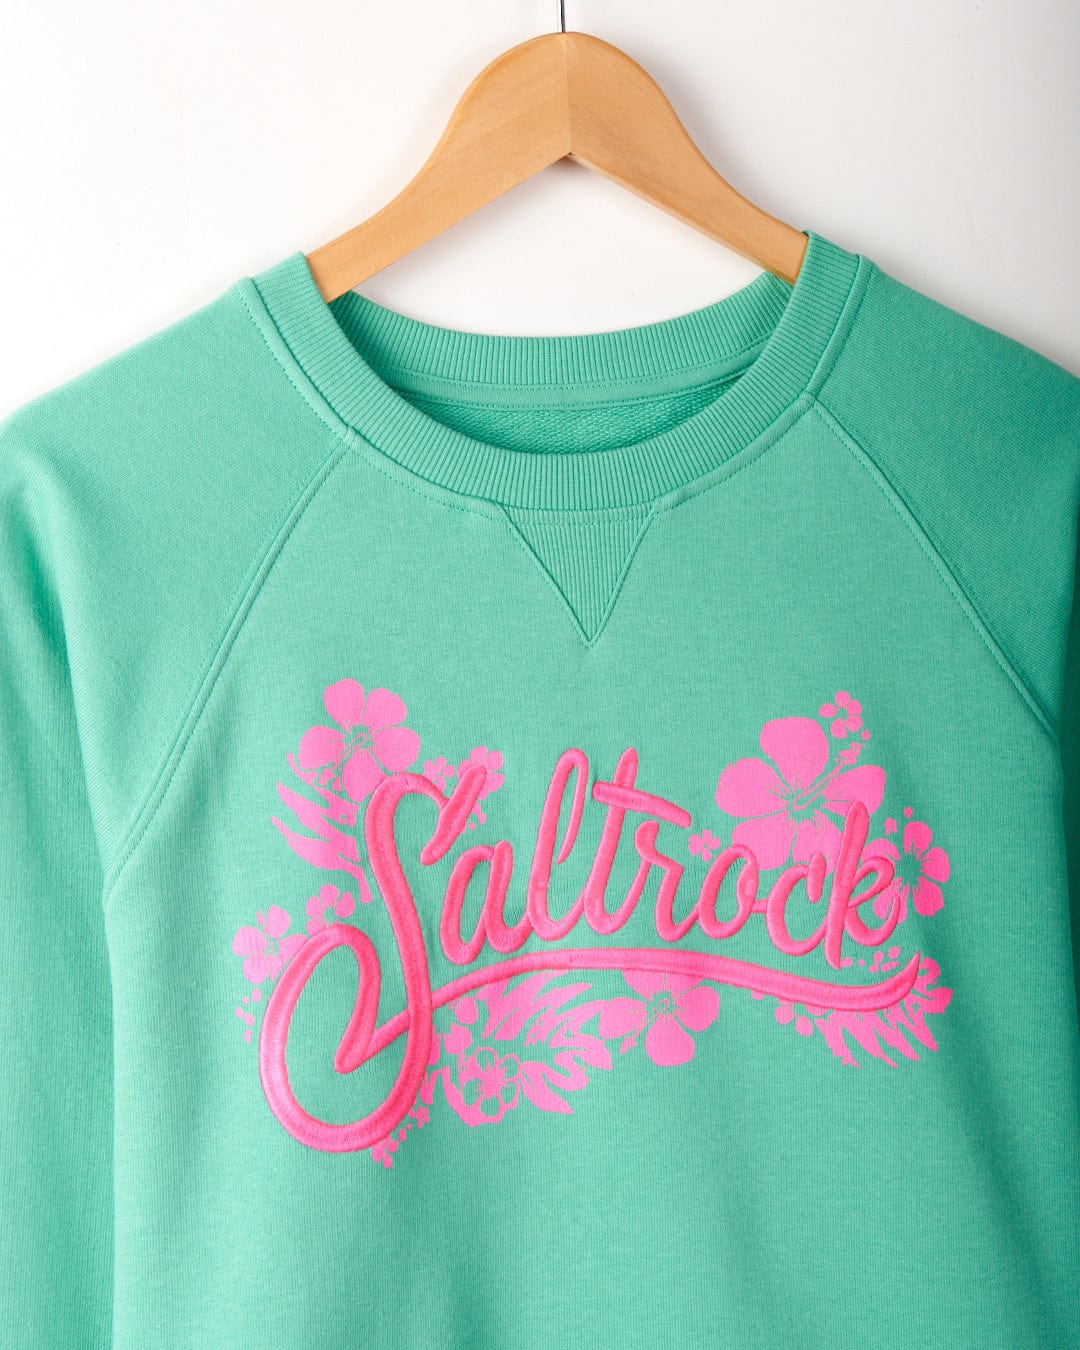 A Tropic - Womens Sweat - Green on a wooden hanger featuring the word "Saltrock" in pink cursive with floral accents, made from 100% cotton and machine washable.